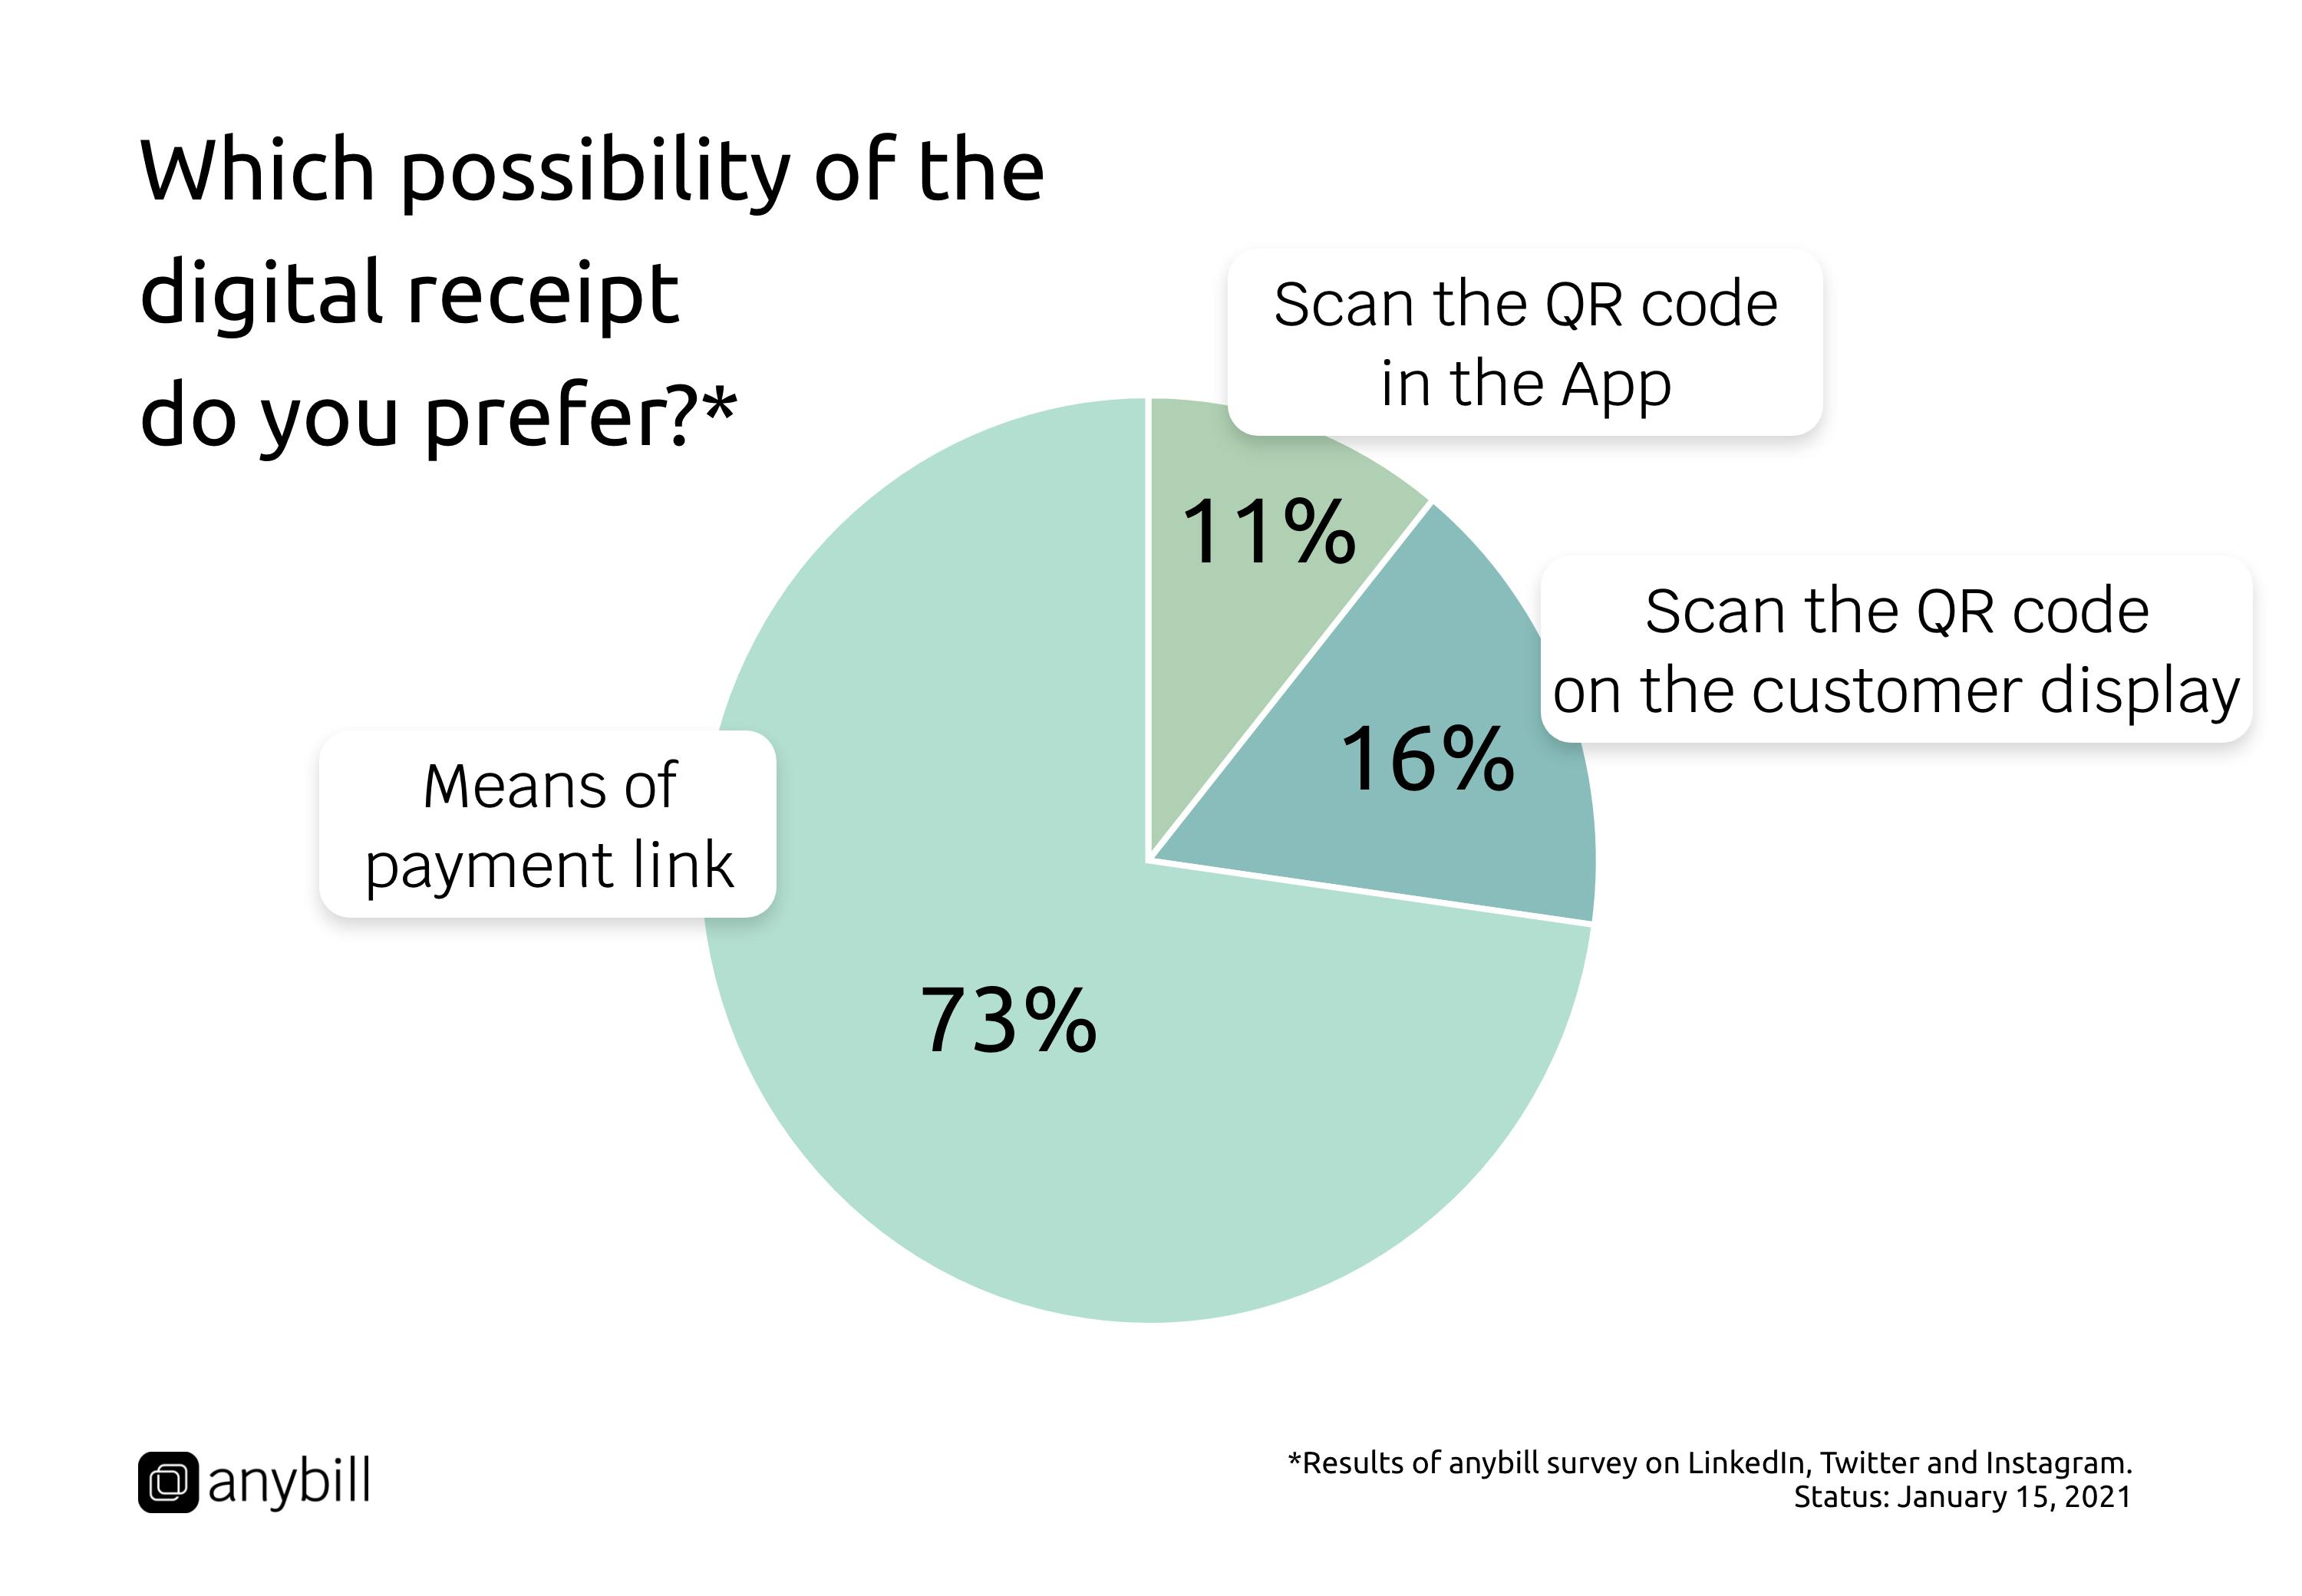 Which possibility of the digital receipt do you prefer? 73% want Means of payment link, 16% want Scan the QR code on the customer display and 11% want Scan the QR code in the App.